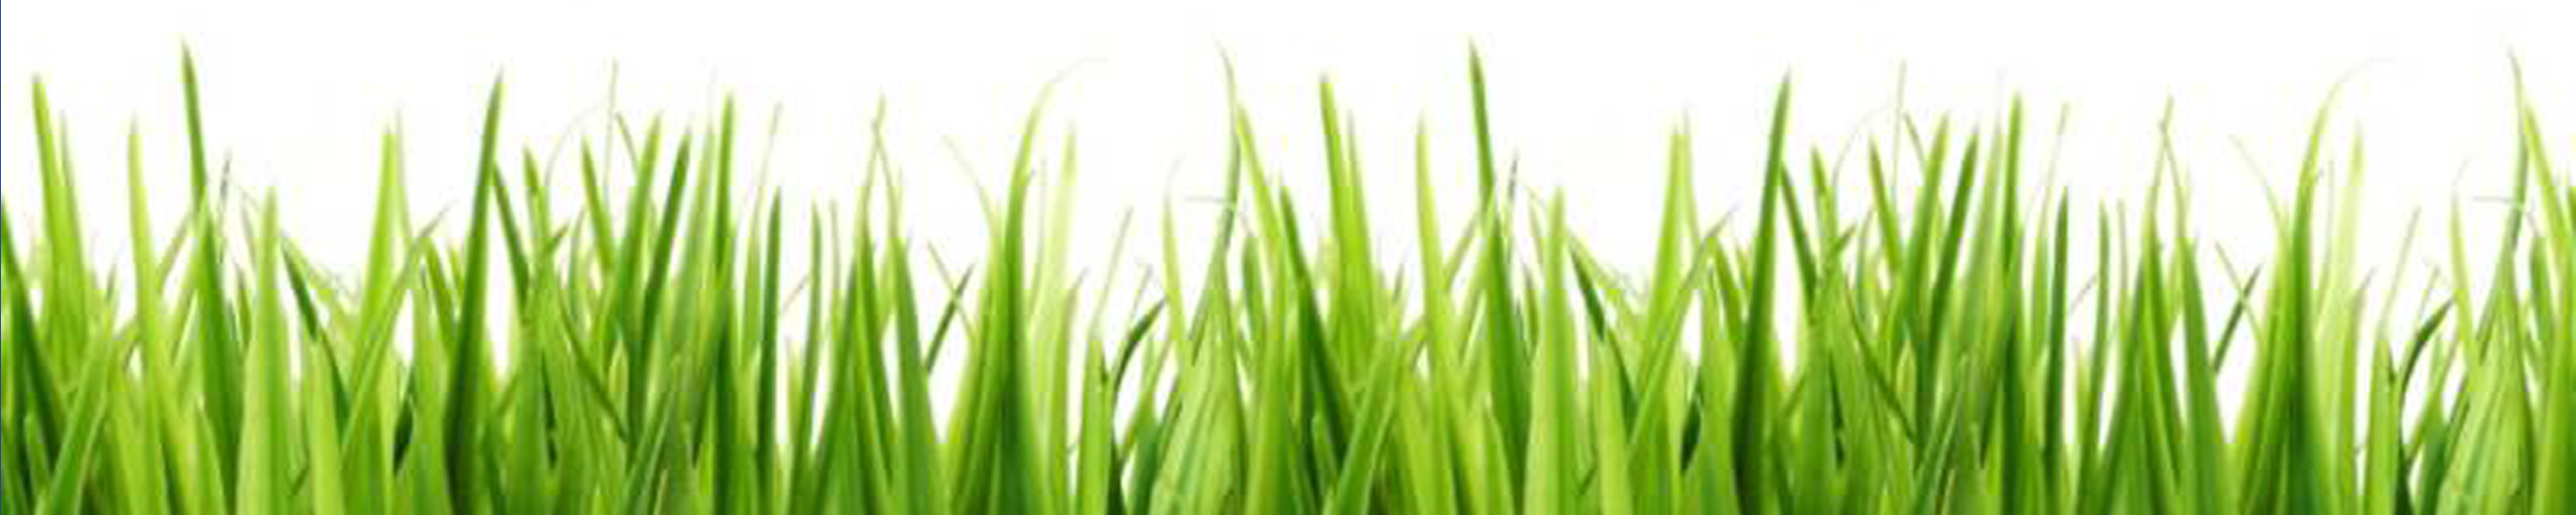 Grass clip art free free clipart images 6